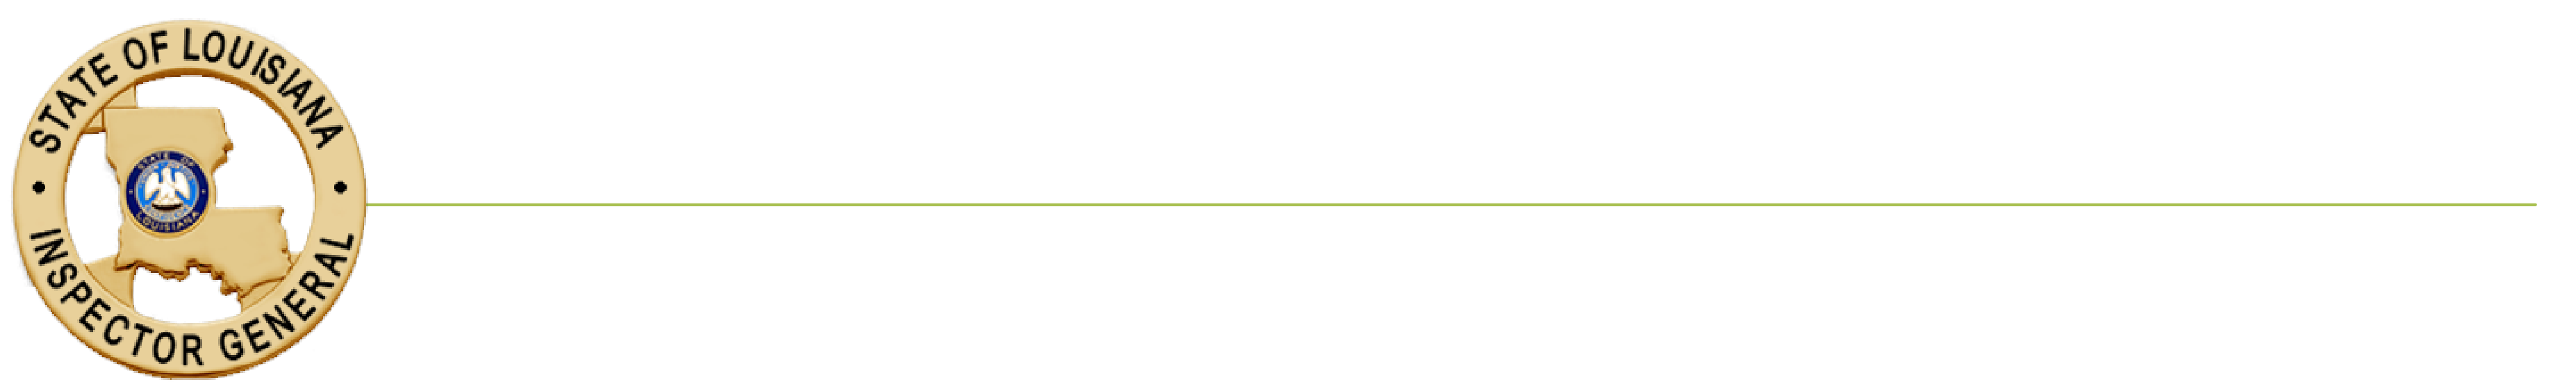 Louisiana State Inspector General